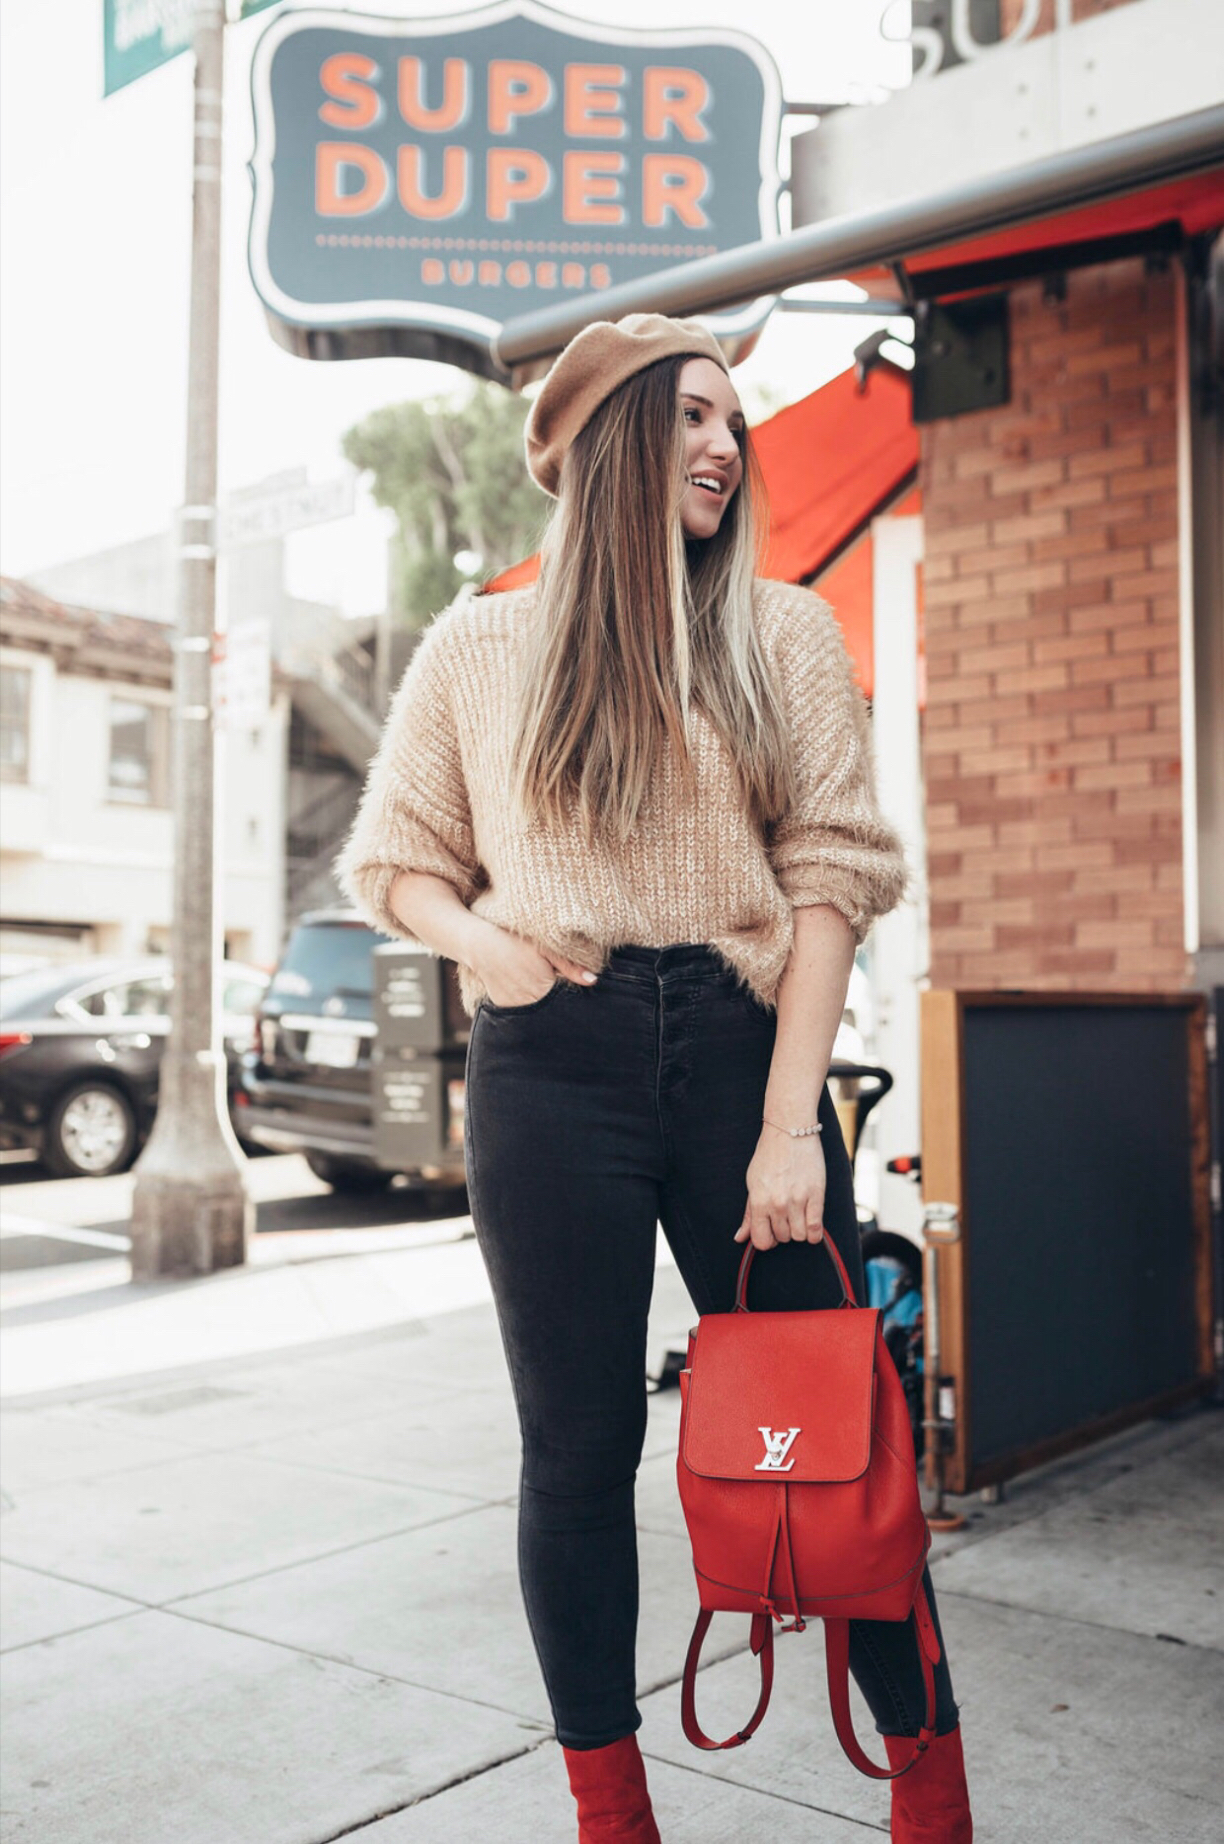  BEST DENIM BLACK FRIDAY DEALS FOR 2019 by popular San Francisco life and style blog Just Add Glam: image of a woman outside wearing a pair of black denim jeans.